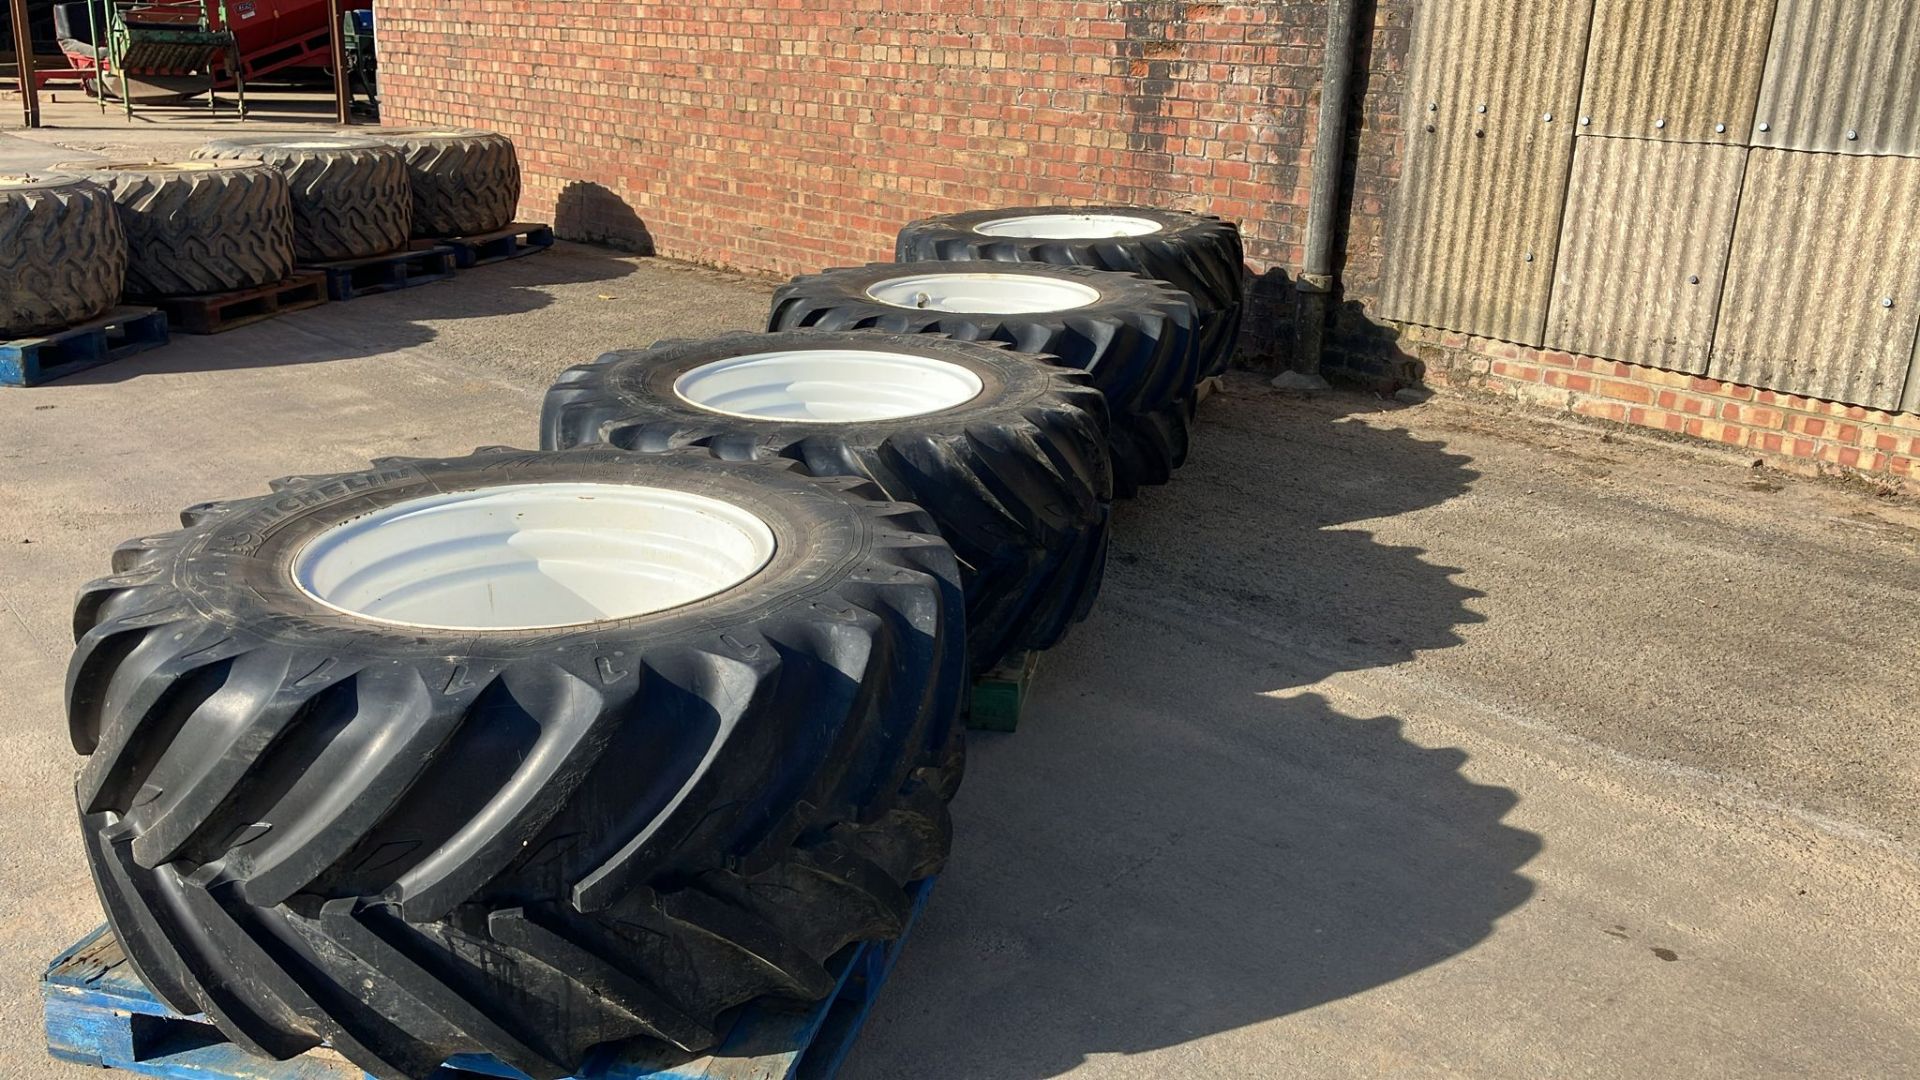 Set of 4 x Michelin floatation wheels to fit above sprayer.